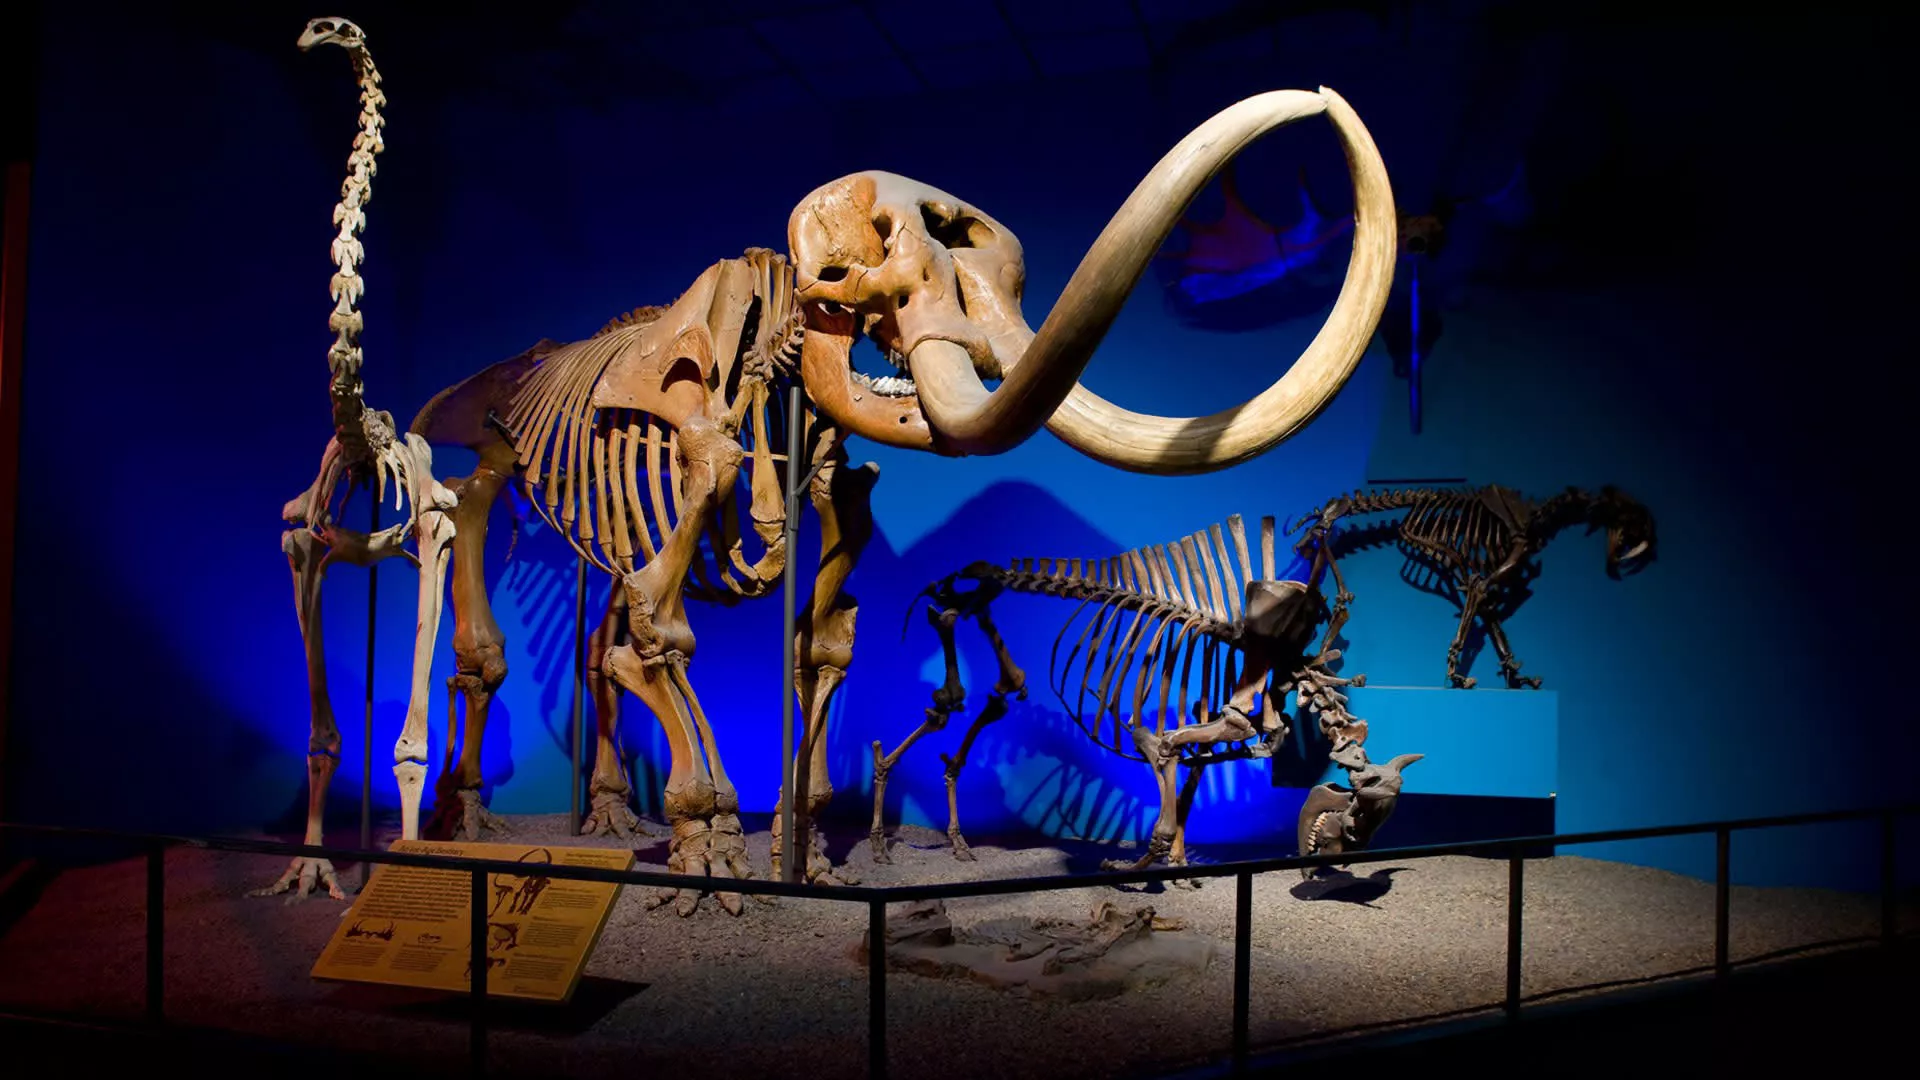 Milwaukee Public Museum in USA, North America | Museums - Rated 3.9